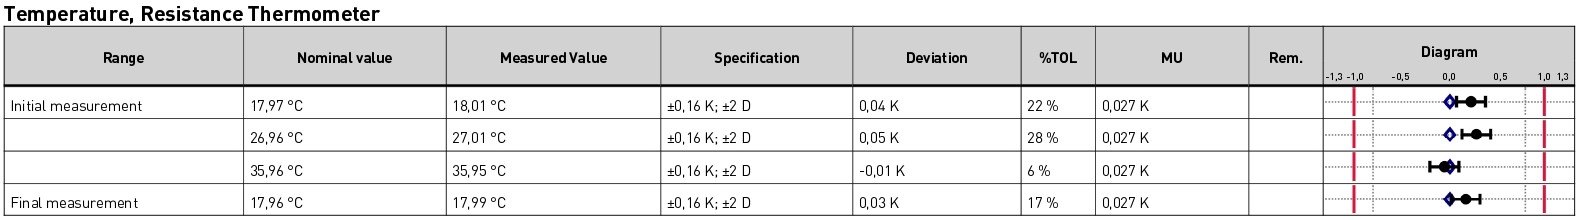 Excerpt of a calibration certificate for temperature on Dracal PTH450